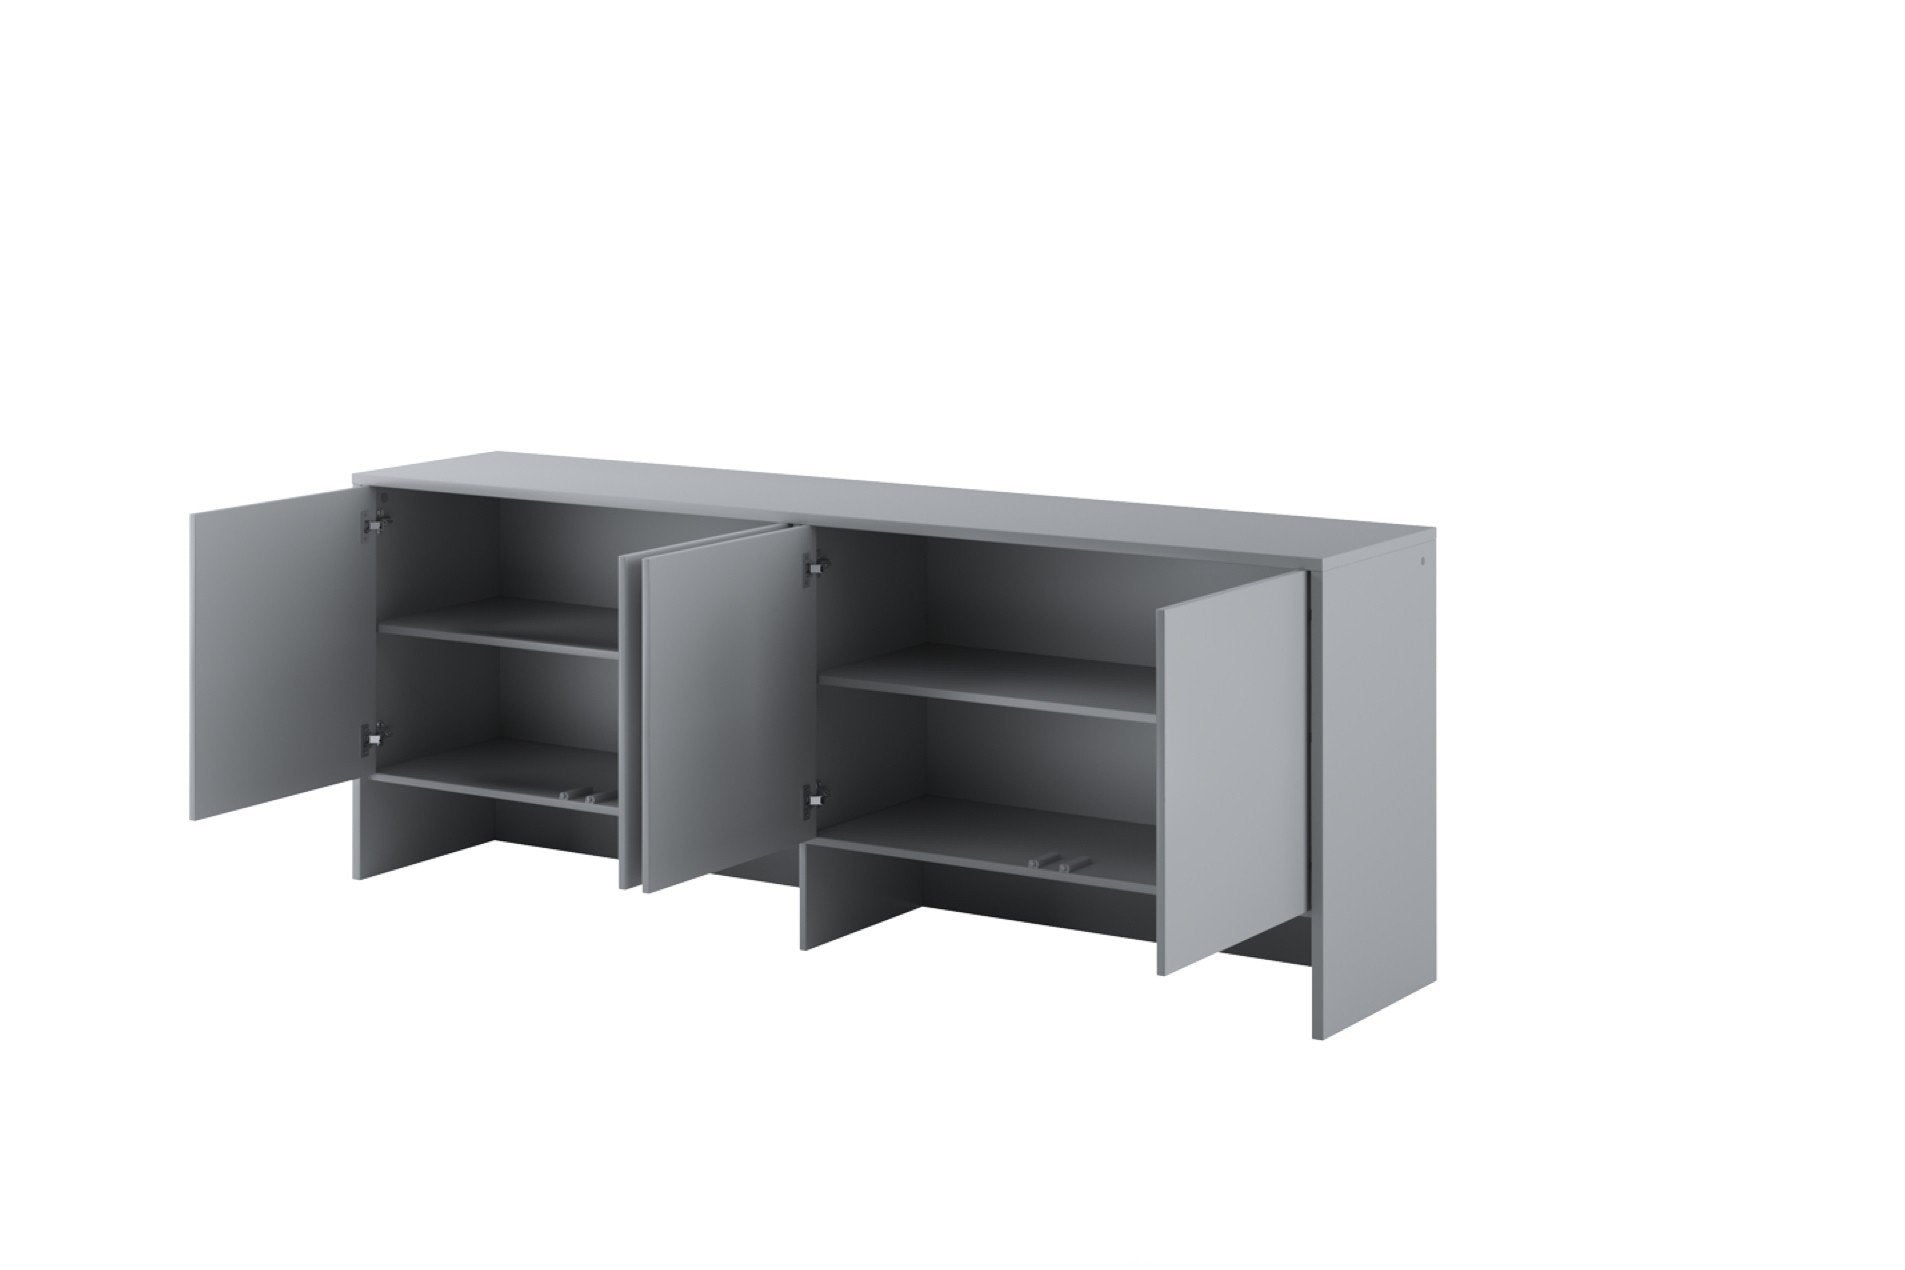 View BC10 Over Bed Unit for Horizontal Wall Bed Concept 120cm Grey Matt 211cm information